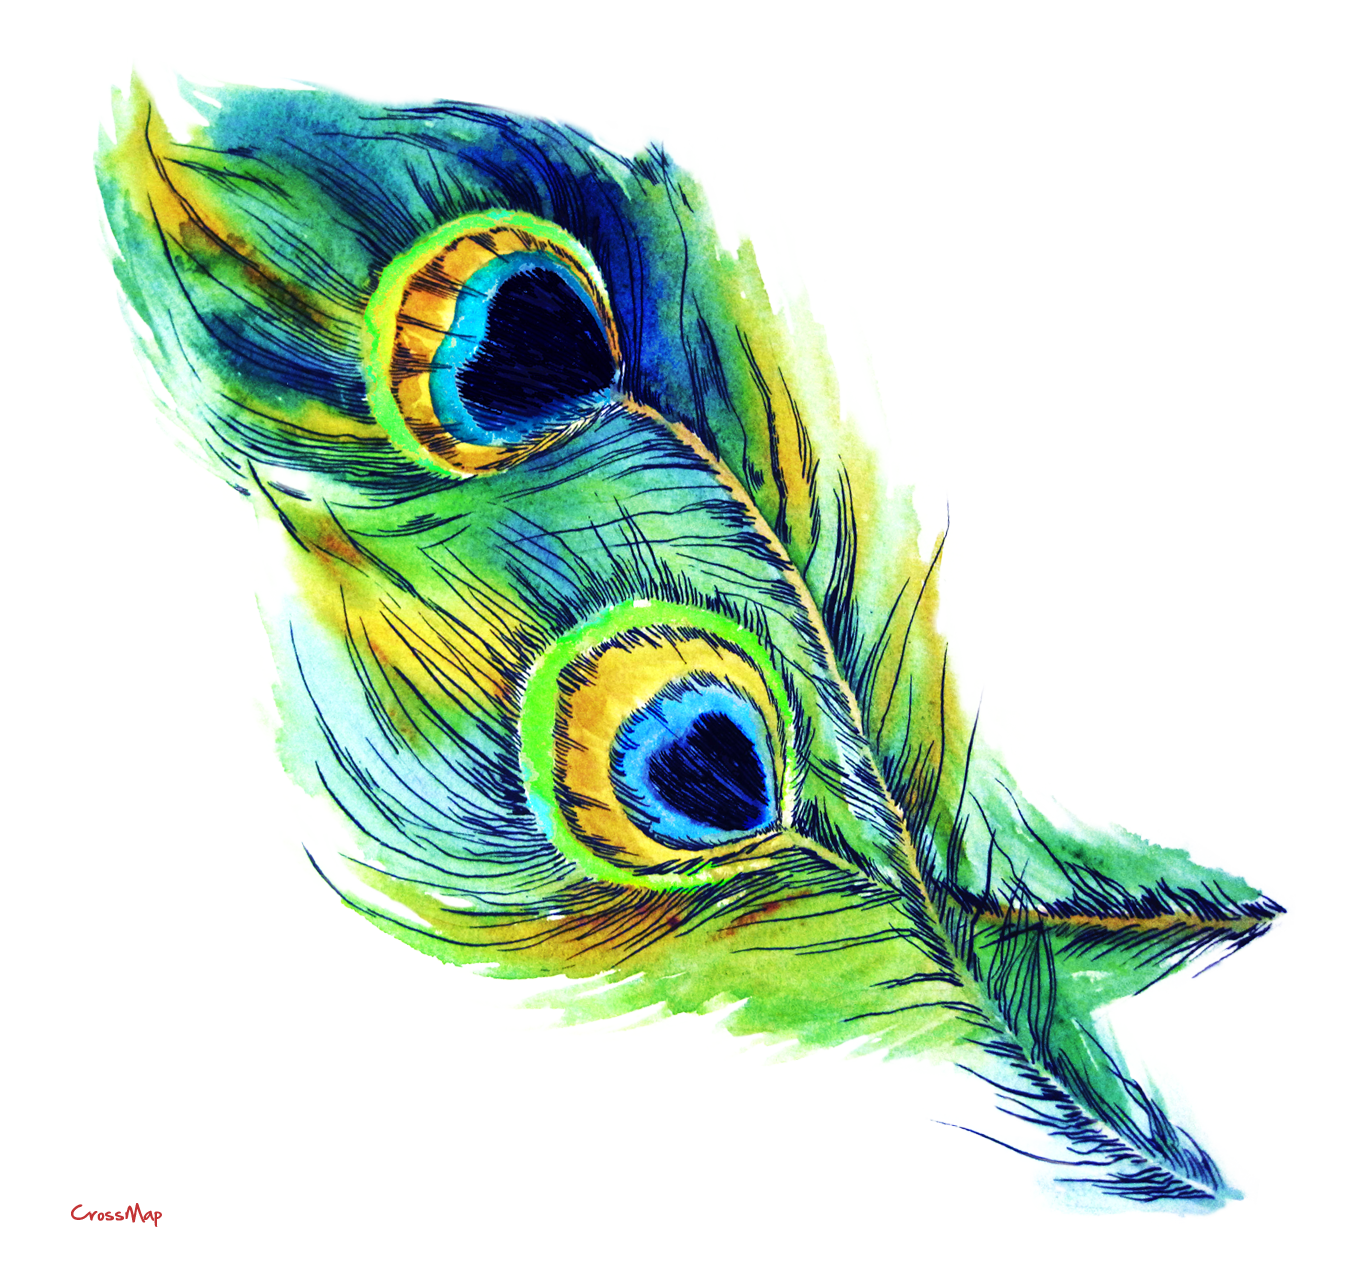 peacock clipart free